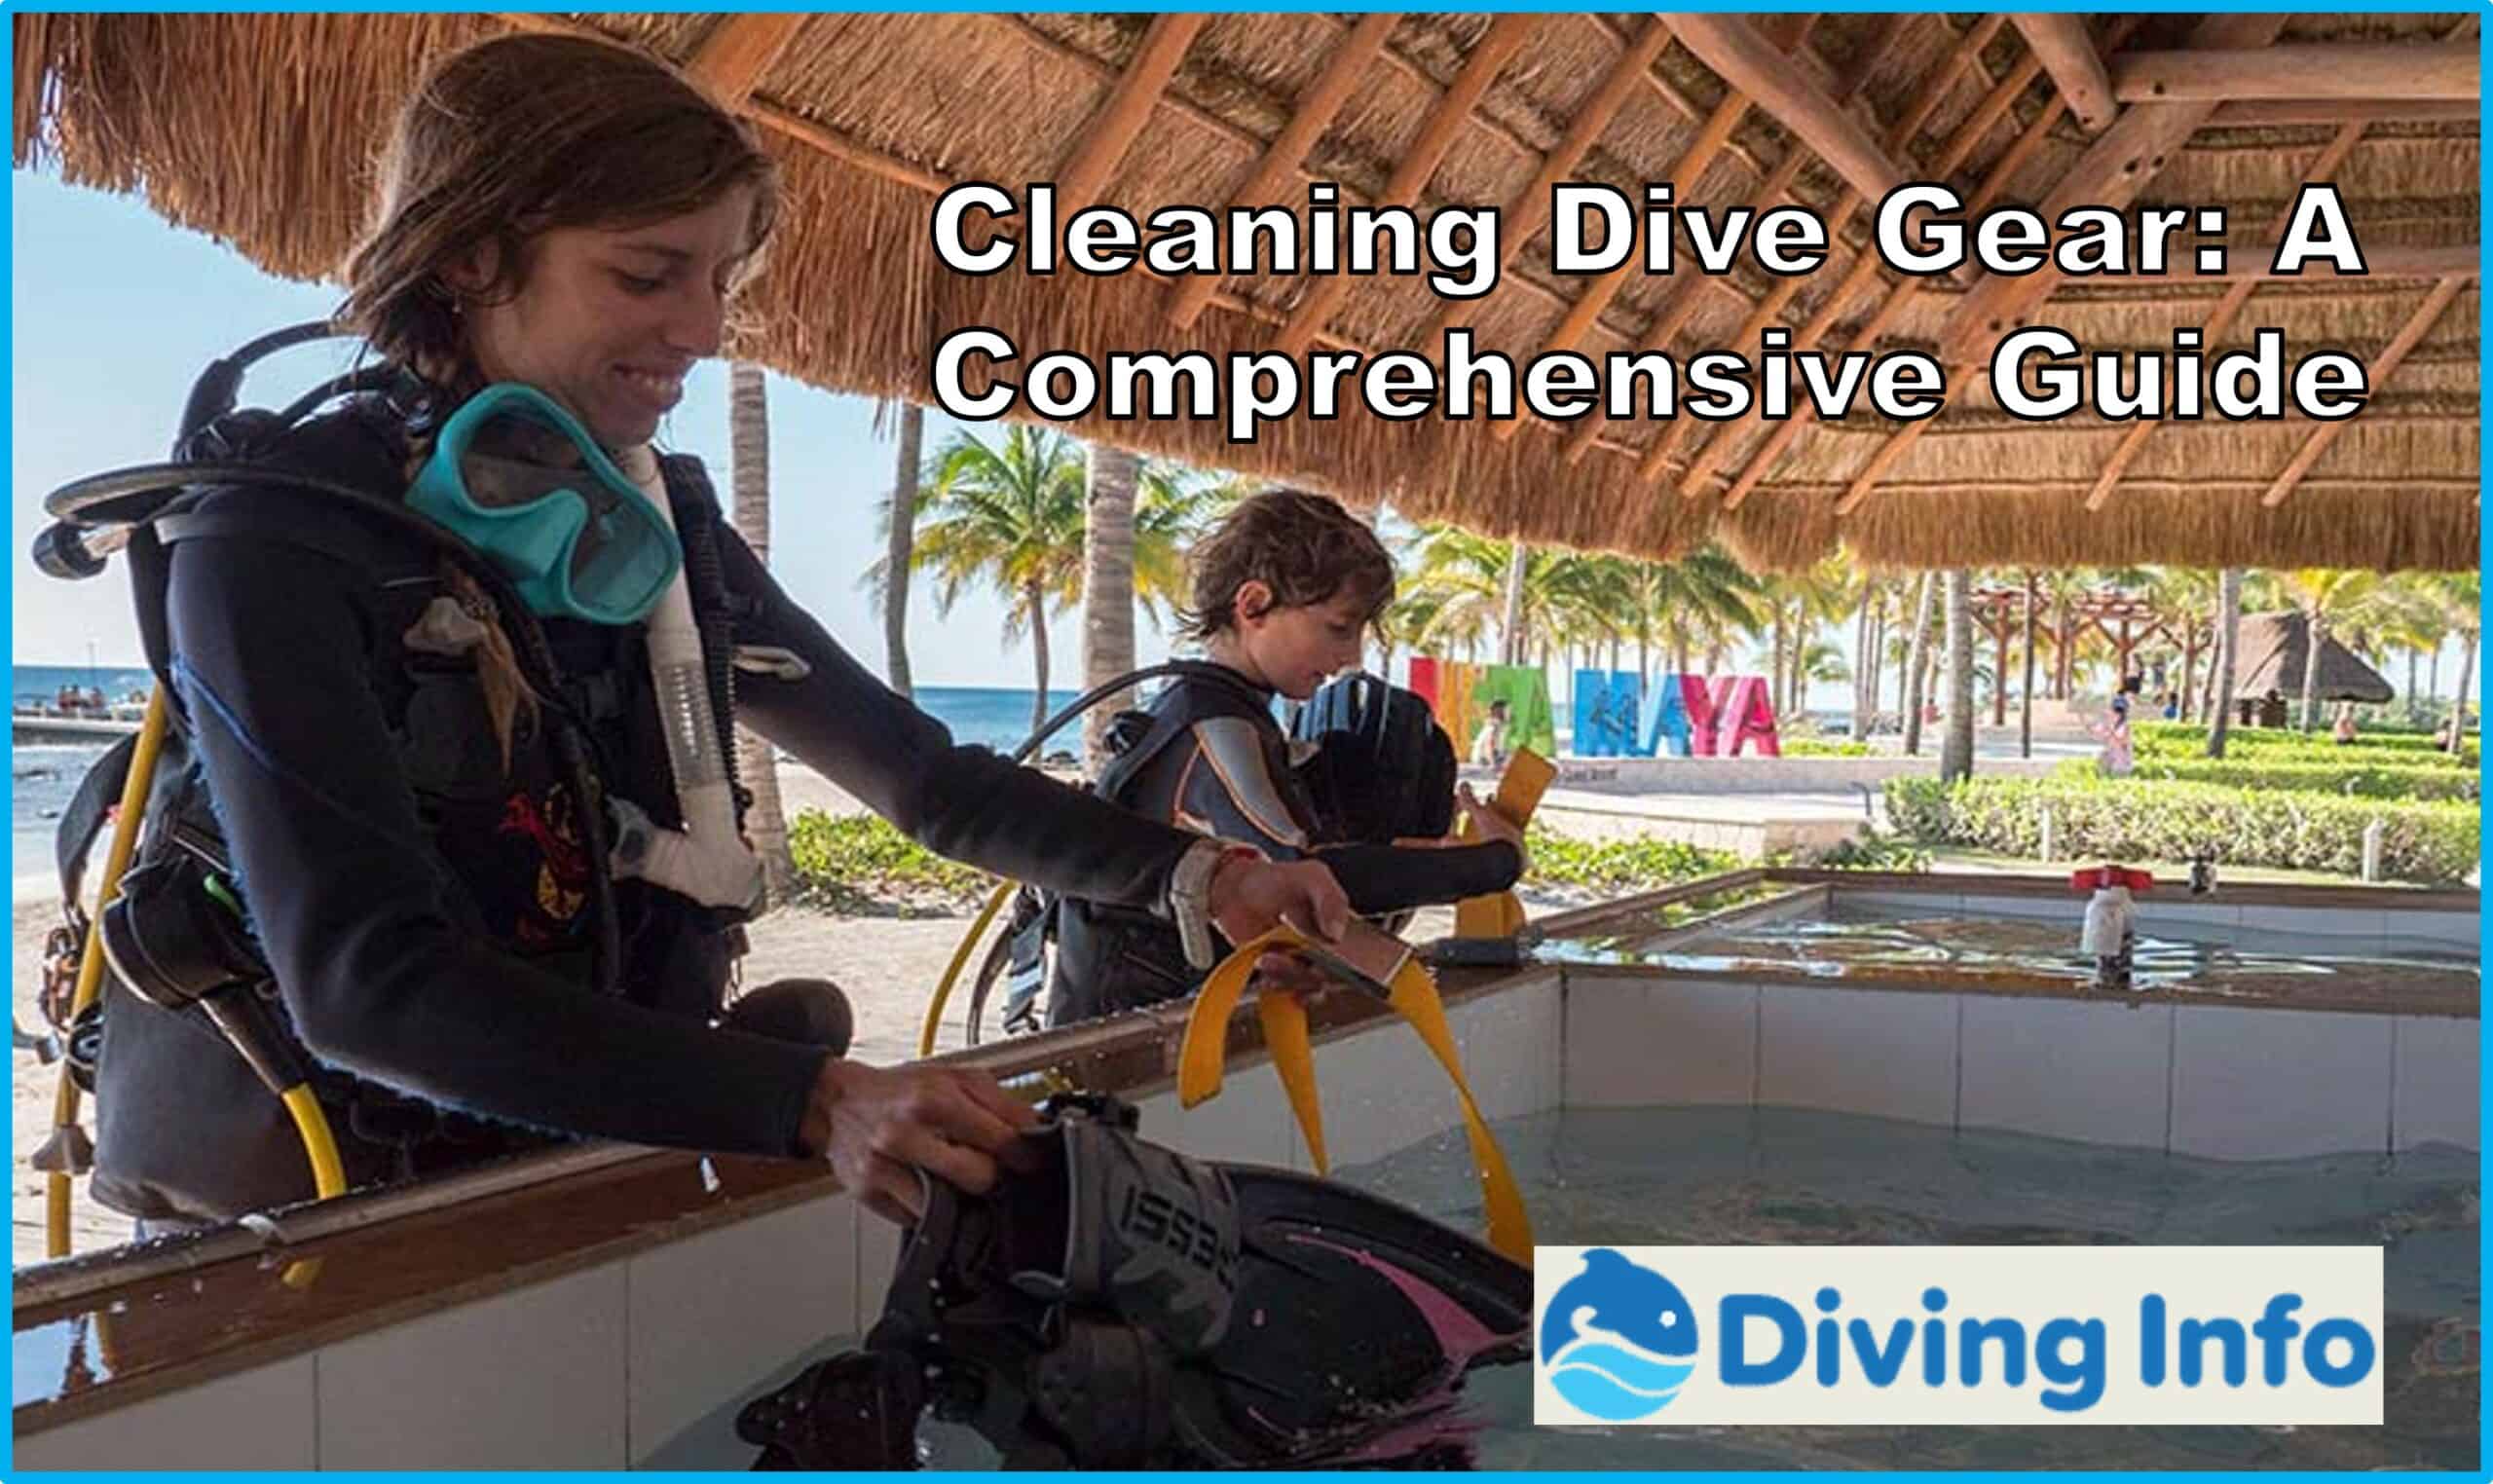 Cleaning Dive Gear: A Comprehensive Guide